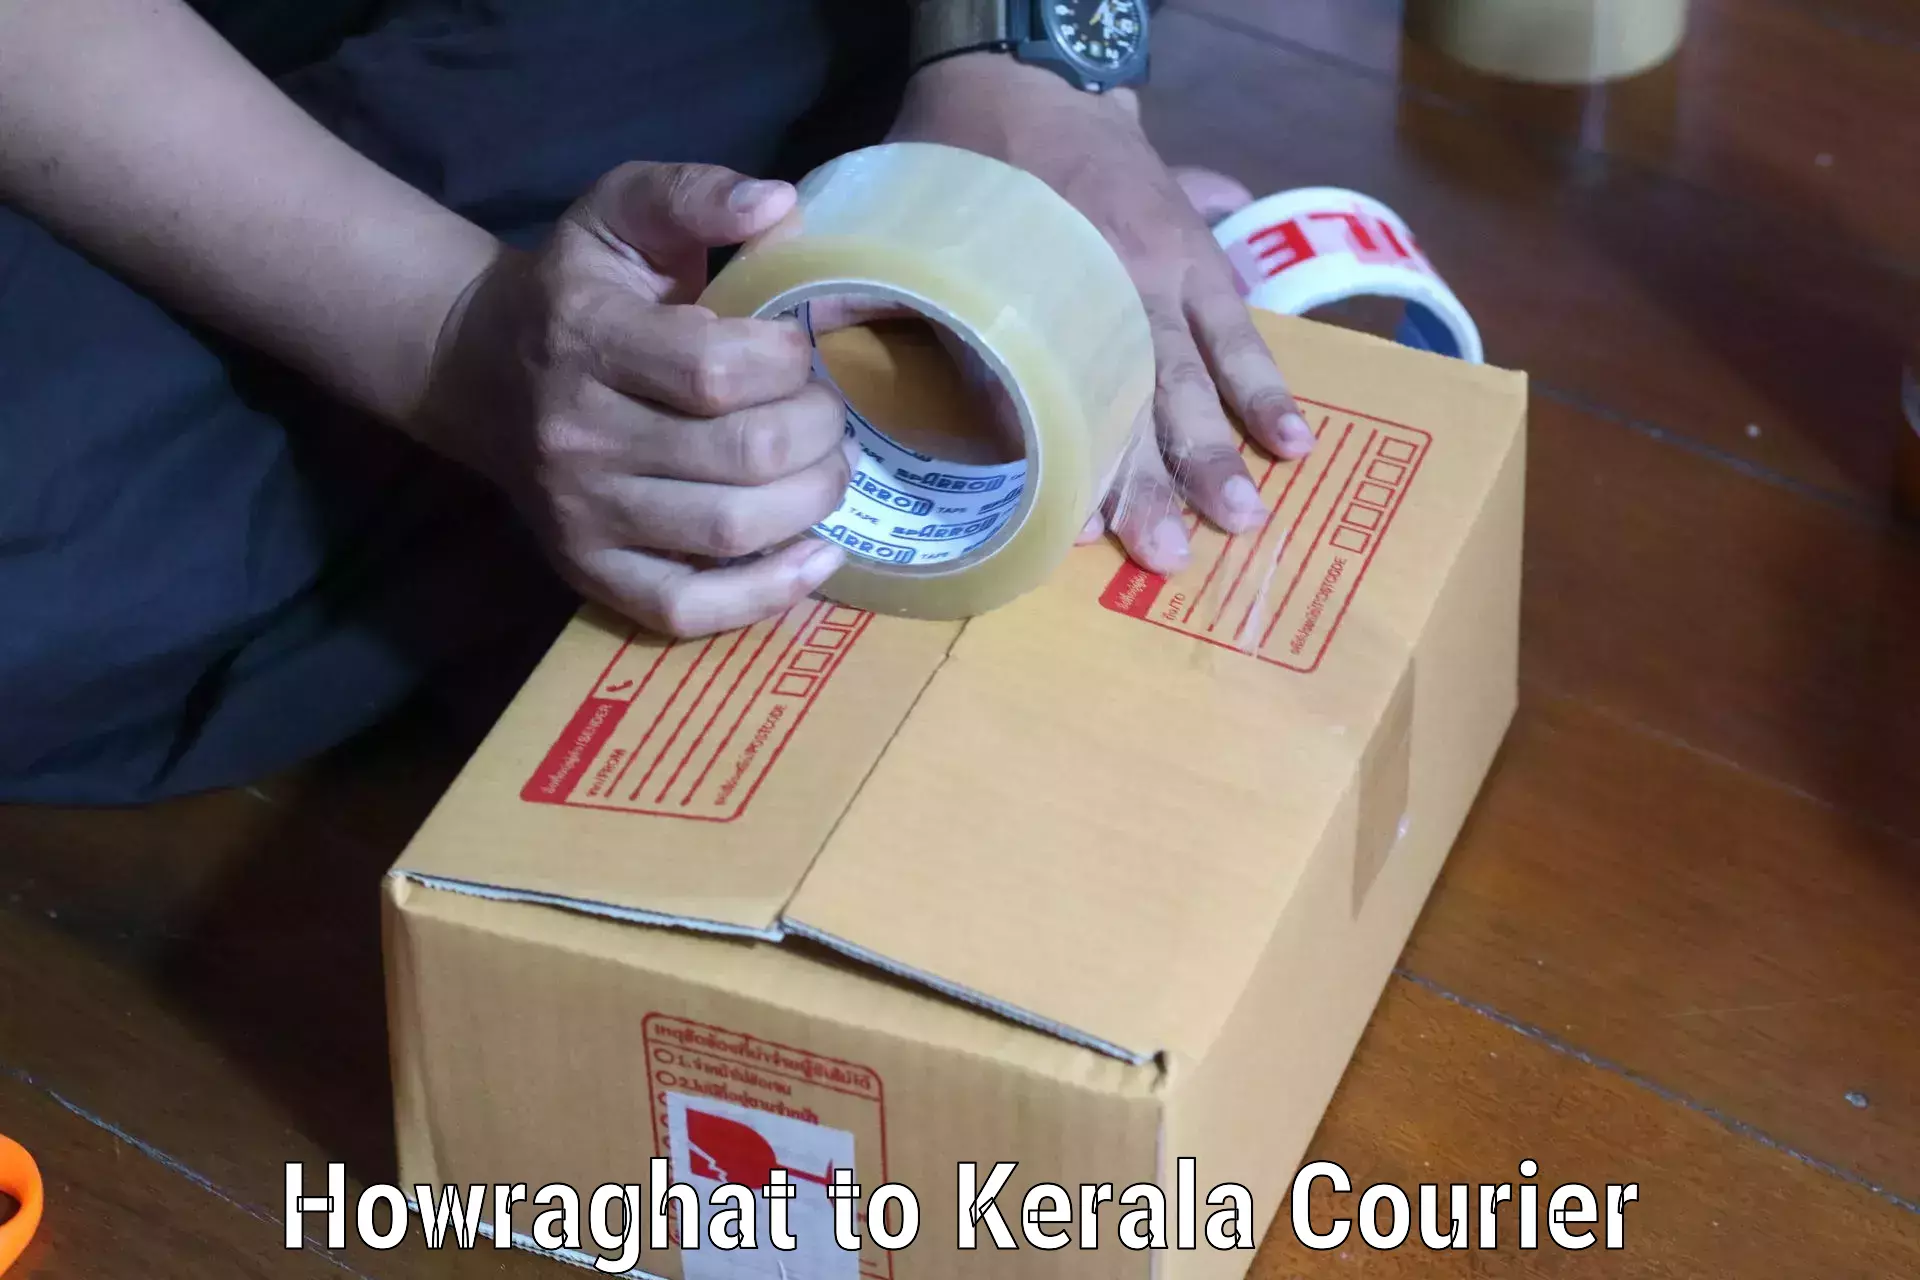 High-quality delivery services Howraghat to Ernakulam